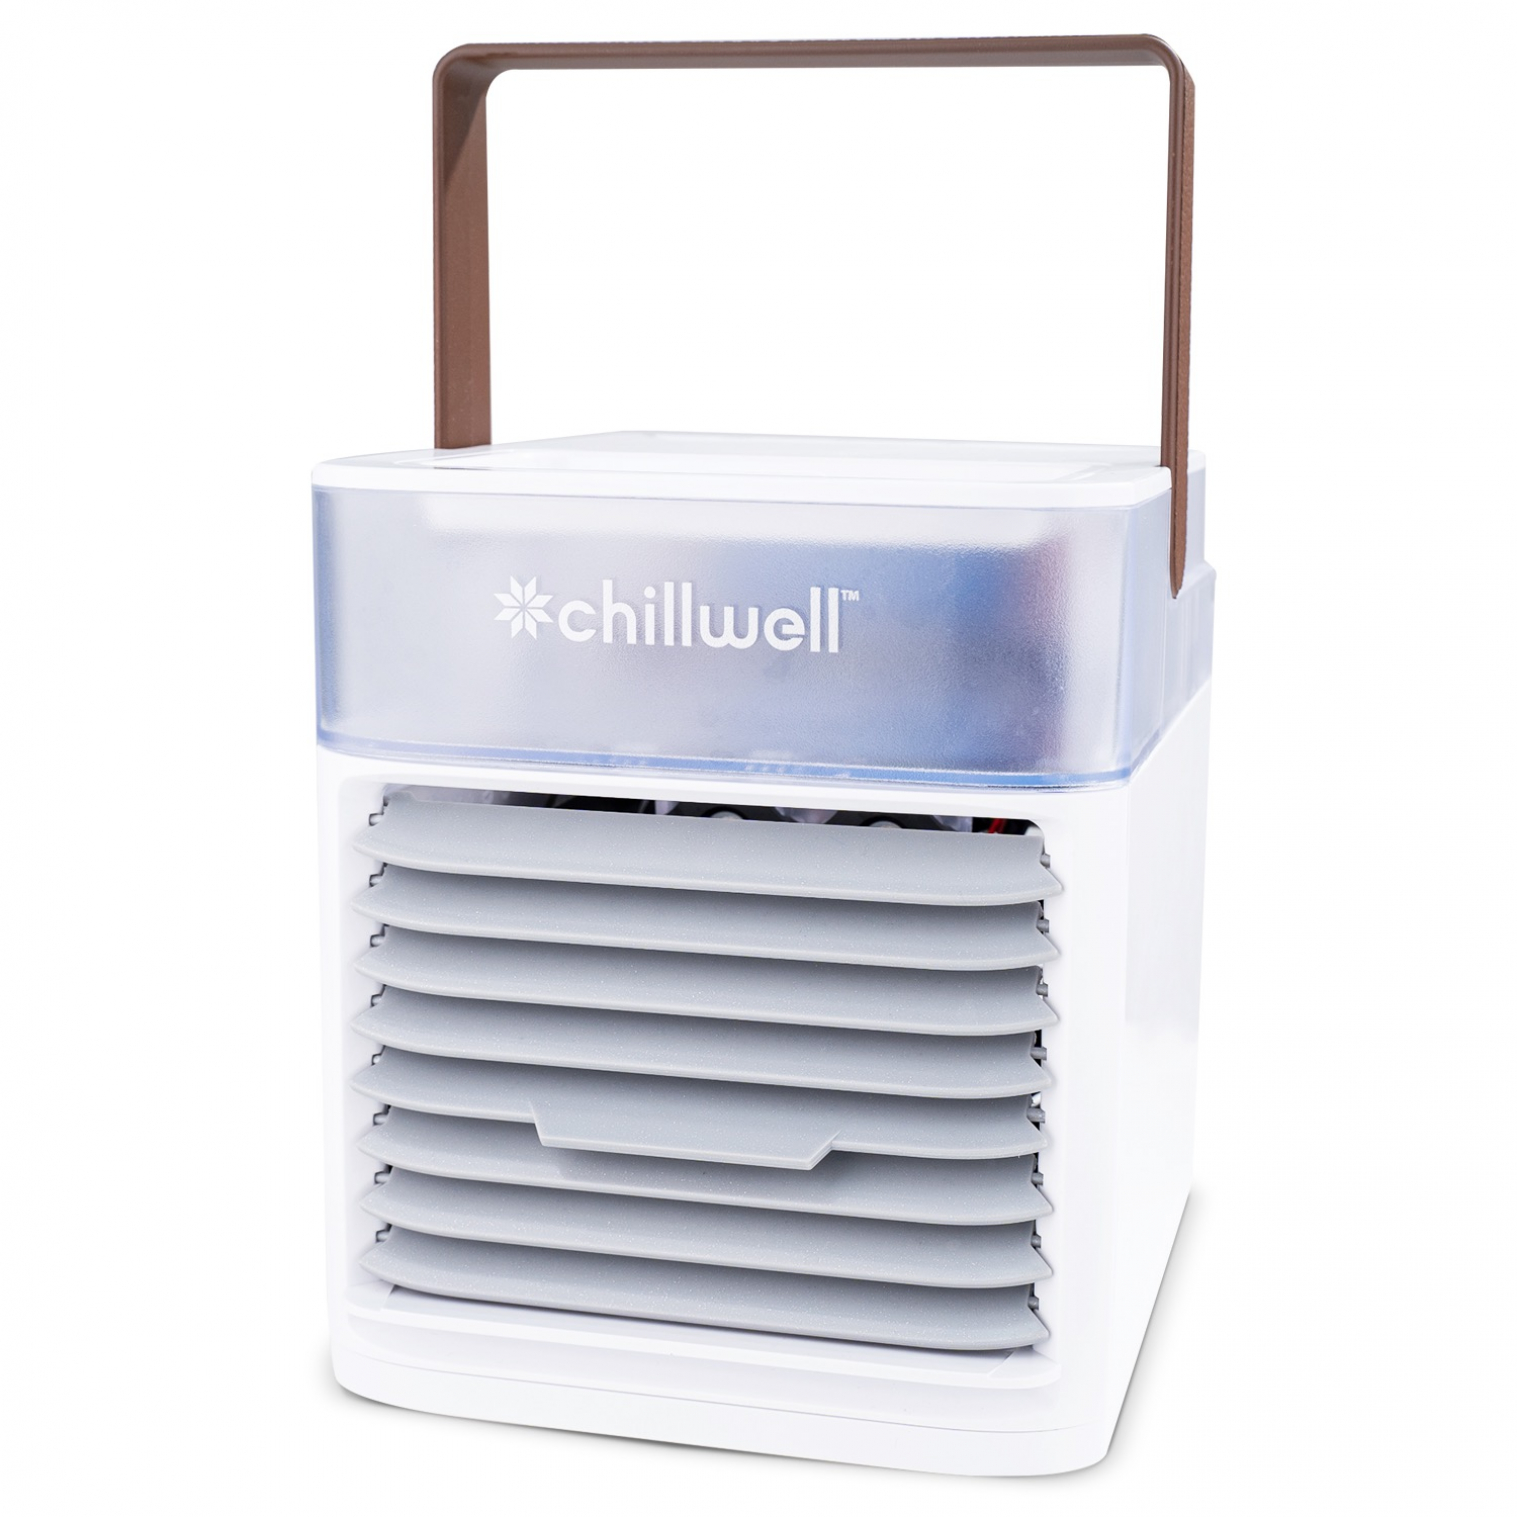 Chillwell Ac Portable Ac Reviews Youtube